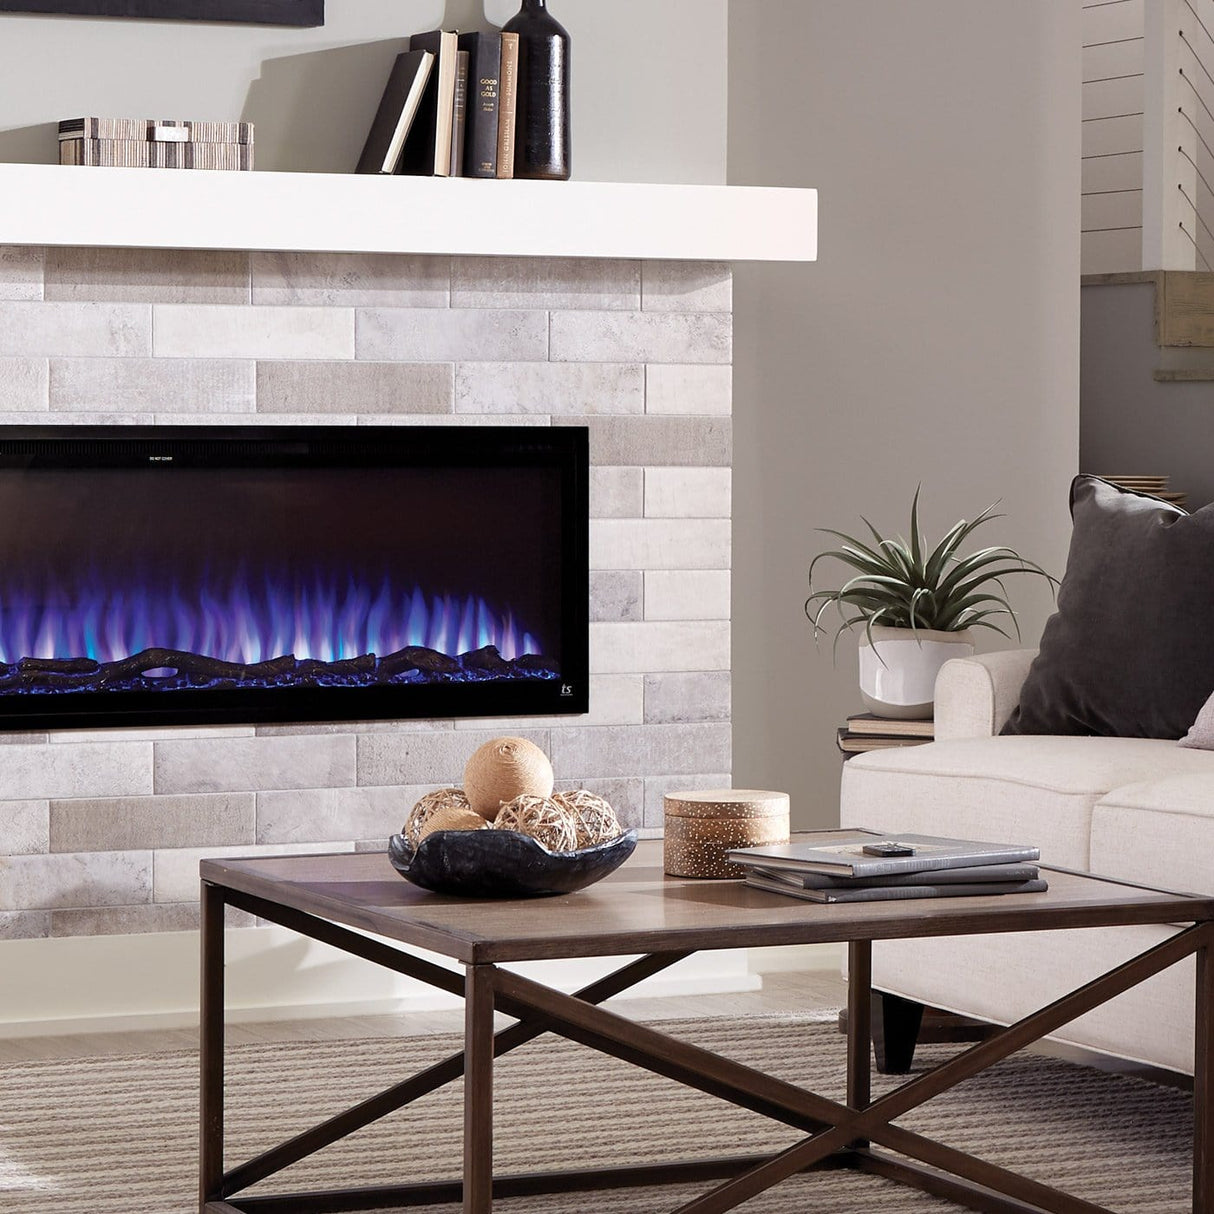 Touchstone Sideline Elite Smart 80036 50" WiFi-Enabled Recessed Electric Fireplace (Alexa/Google Compatible) - TS-80036 - Avanquil